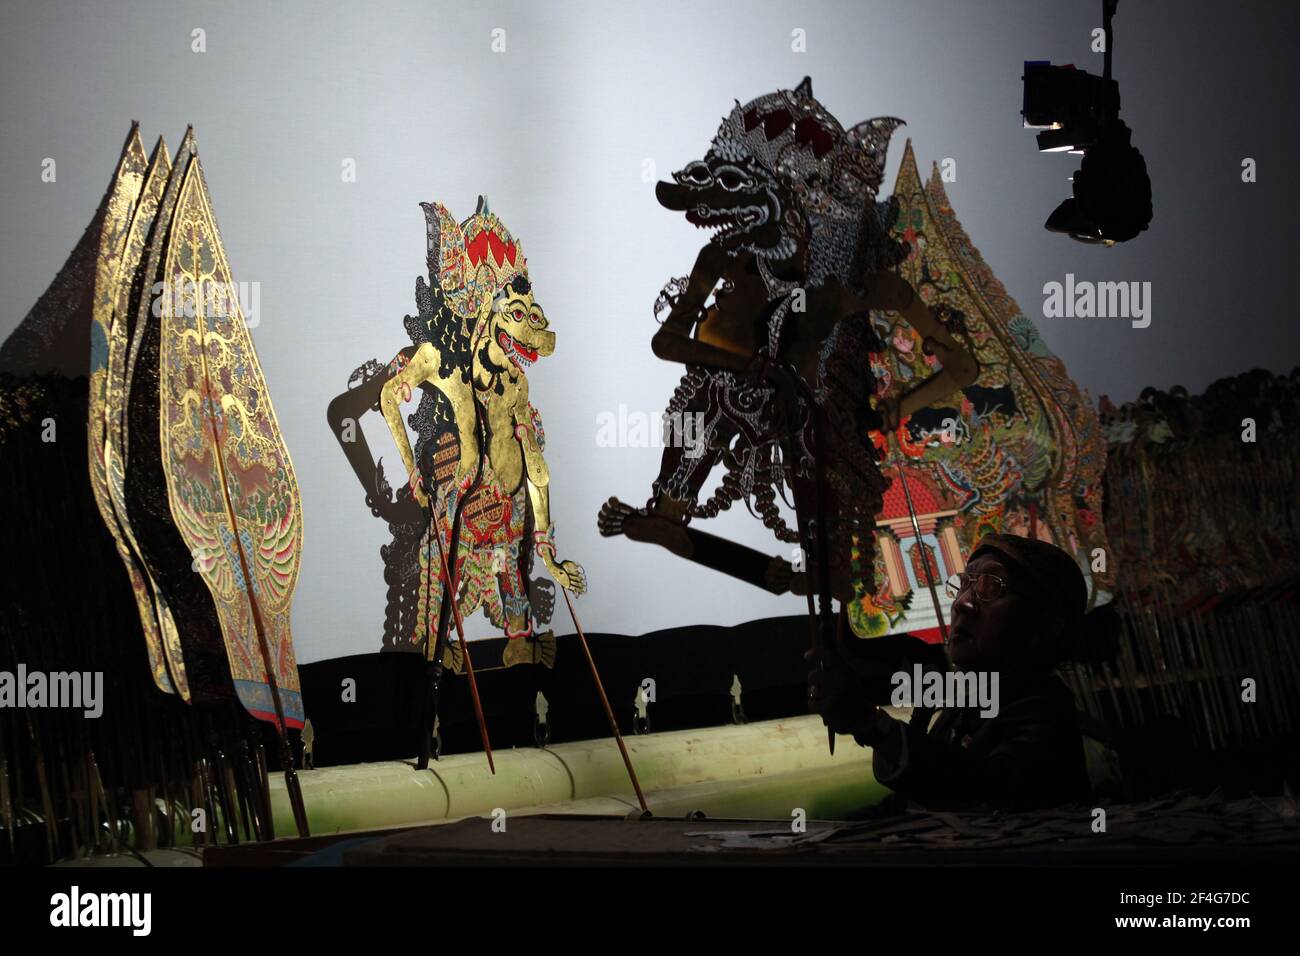 Puppet master (dalang) Manteb Sudharsono performs the wayang kulit performance 'Sudamala' in the Sasono Hinggil Theatre in Yogyakarta, Central Java, Indonesia. Traditional puppet shadow theatre known as wayang kulit is widespread on the islands of Java and Bali in Indonesia. Each wayang kulit performance continues about eight hours through the night without intermissions and only one puppet master (dalang) conducts all puppets projected on a linen screen and vocalizes them with different voices. Although Indonesia is the most populated Muslim country in the world, stories and characters of way Stock Photo